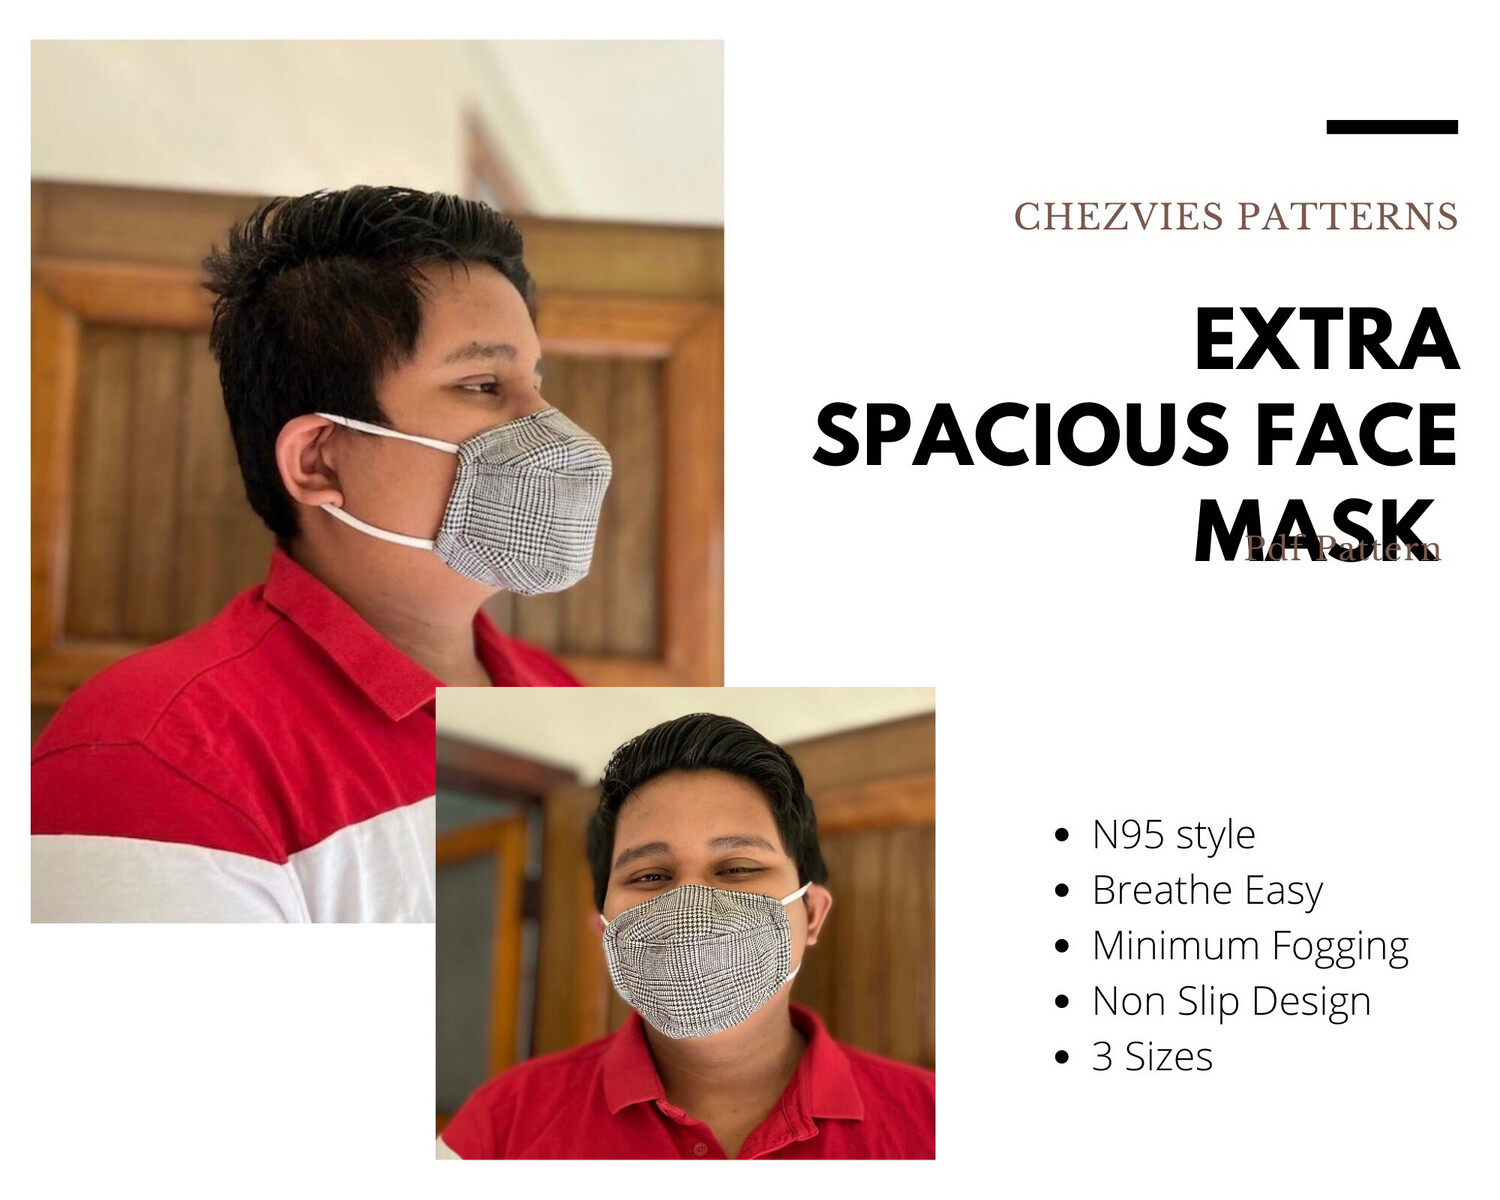 TRIO Mask - N95 Style Cloth Face Mask Sewing Pattern